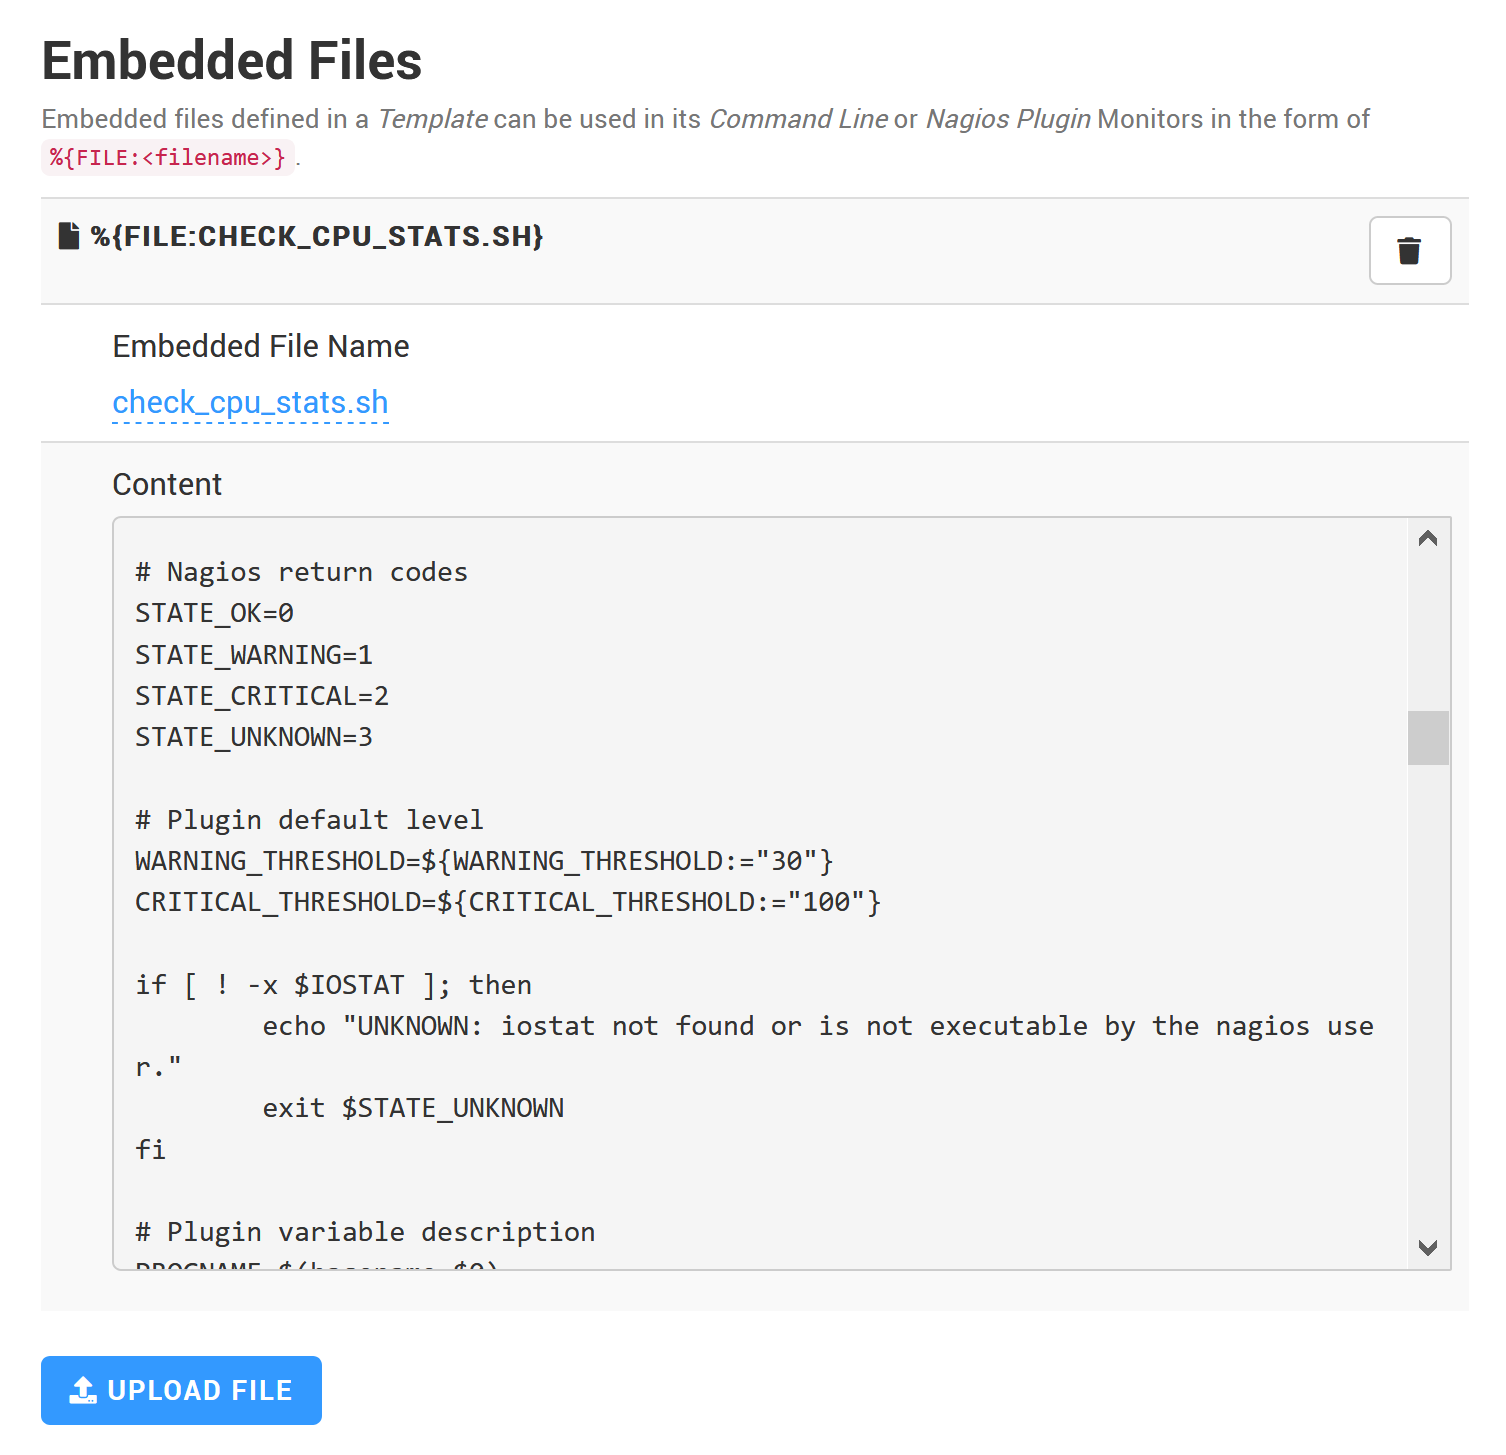 Adding an Embedded File in a Template